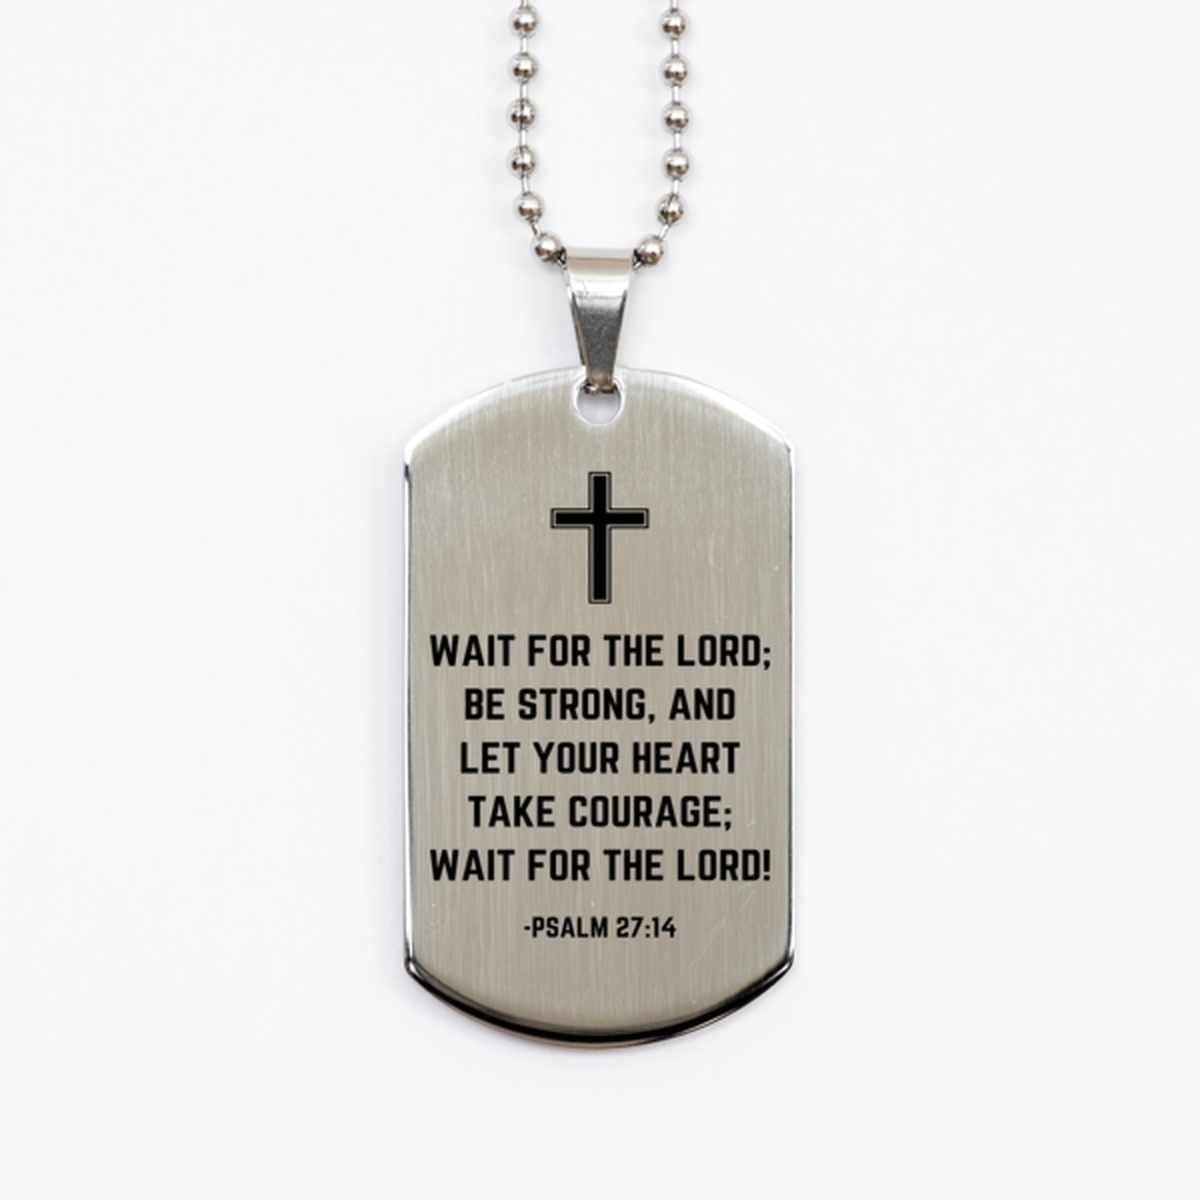 Baptism Gifts For Teenage Boys Girls, Christian Bible Verse Silver Dog Tag, Wait for the Lord, Confirmation Gifts, Bible Verse Necklace for Son, Godson, Grandson, Nephew